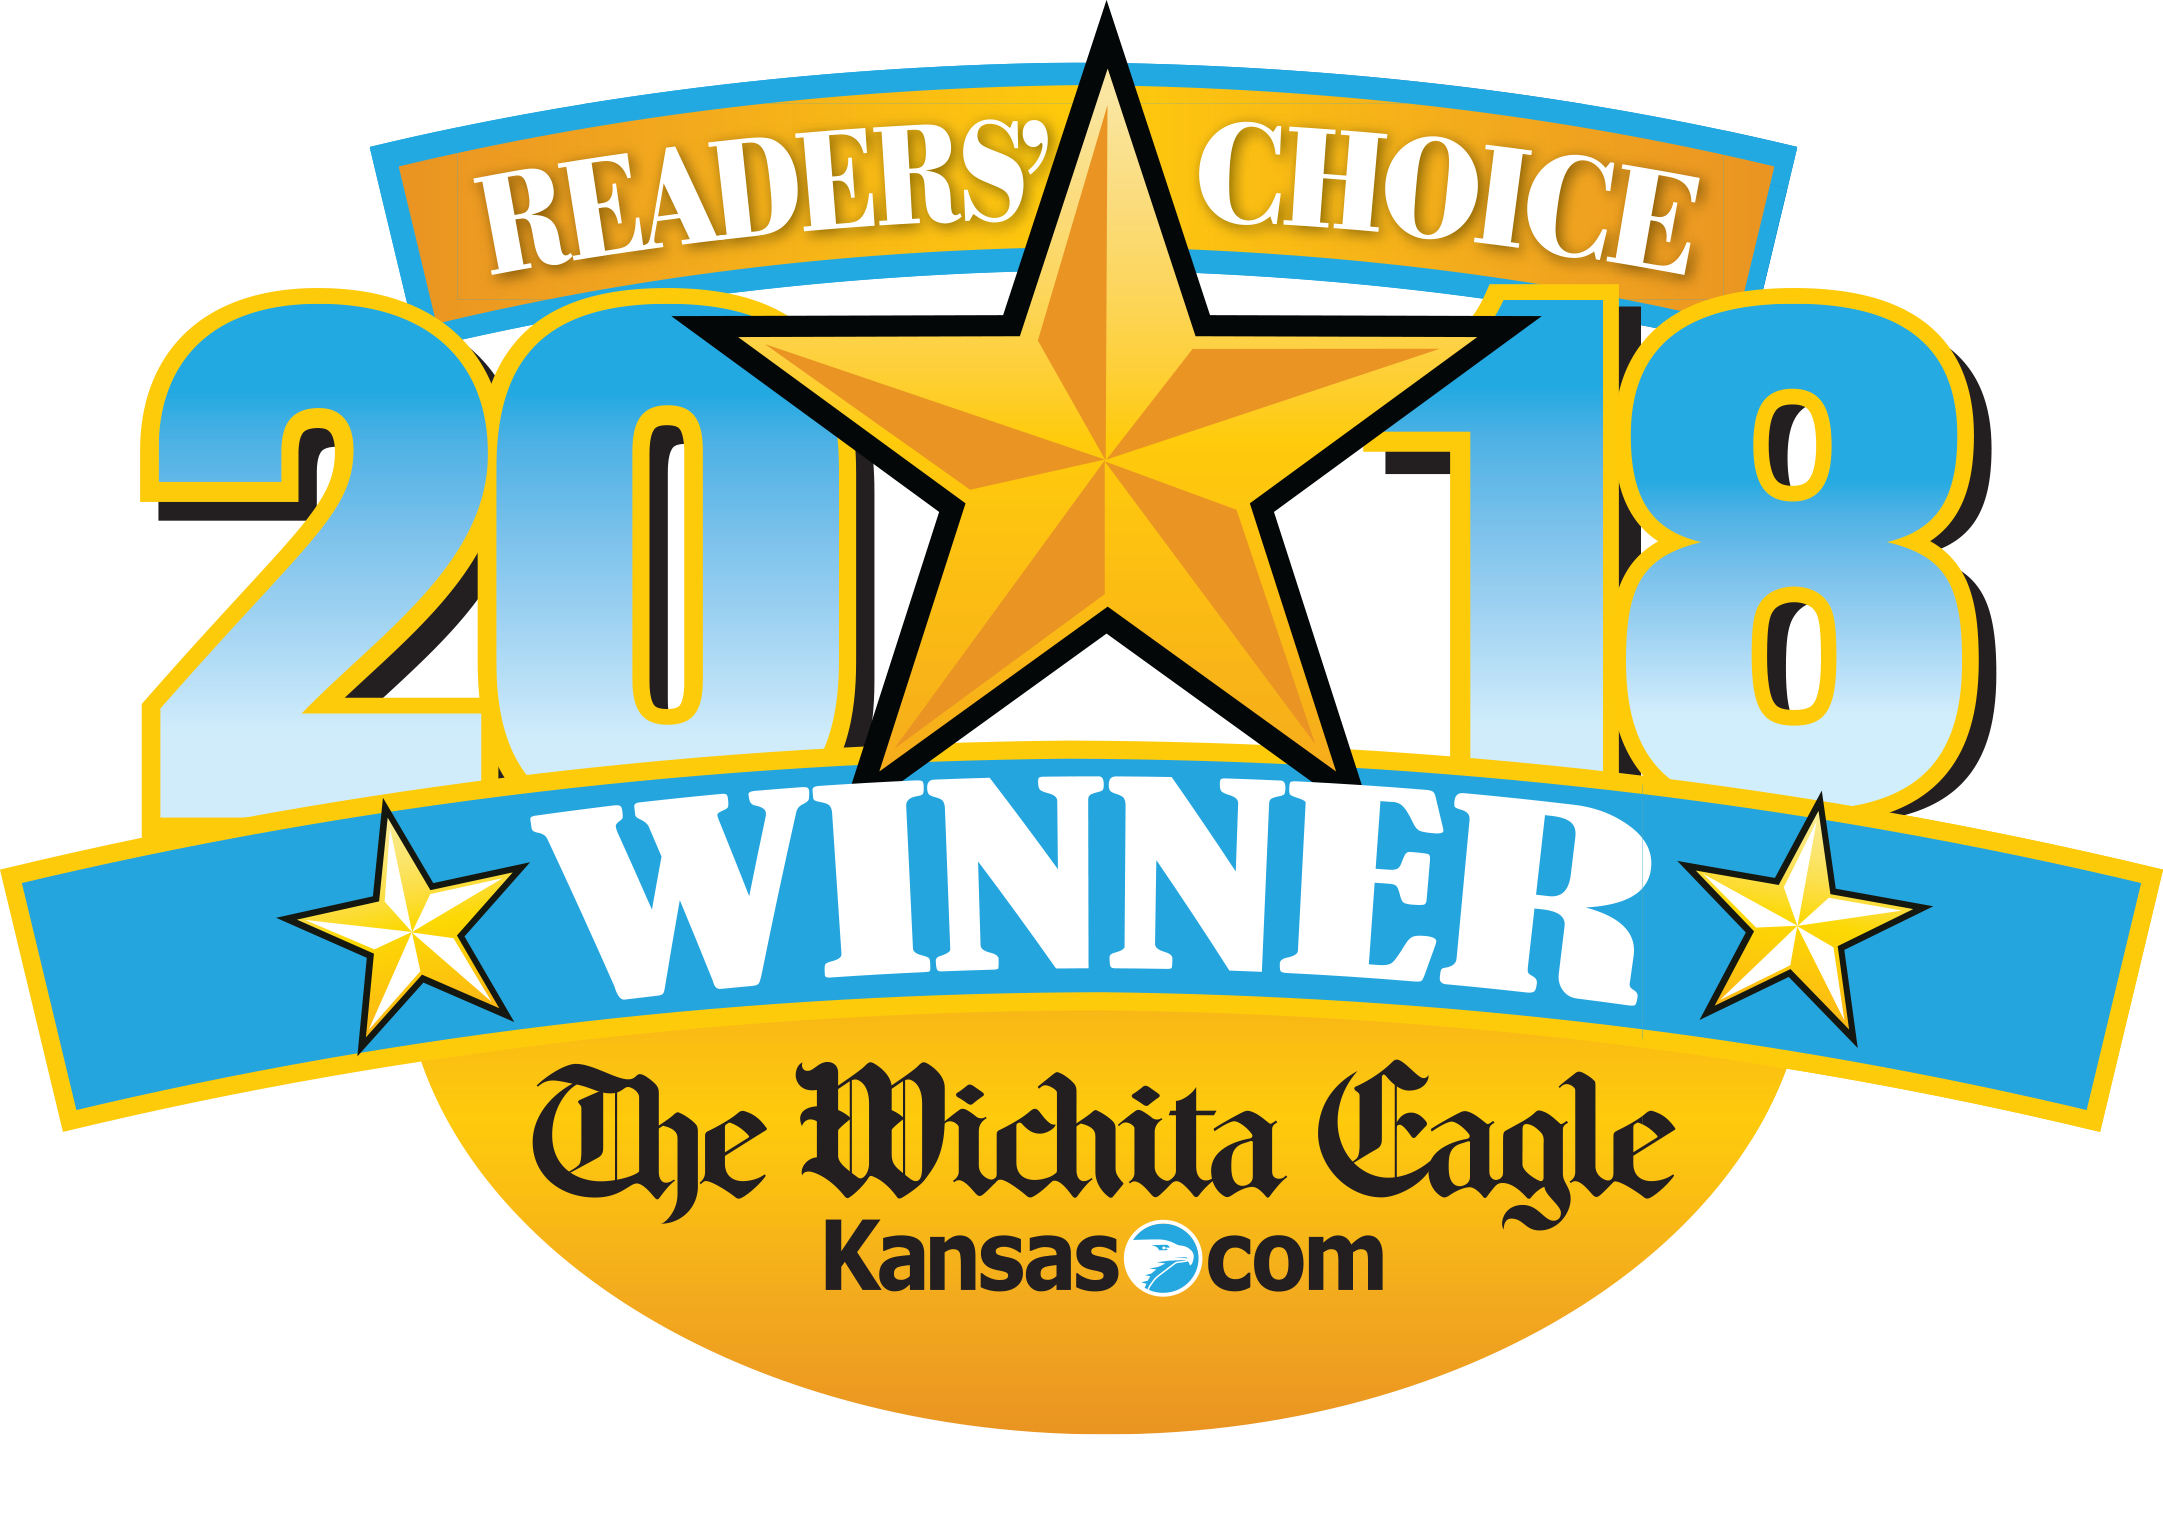 Readers' Choice 2018 winner from The Wichita Eagle